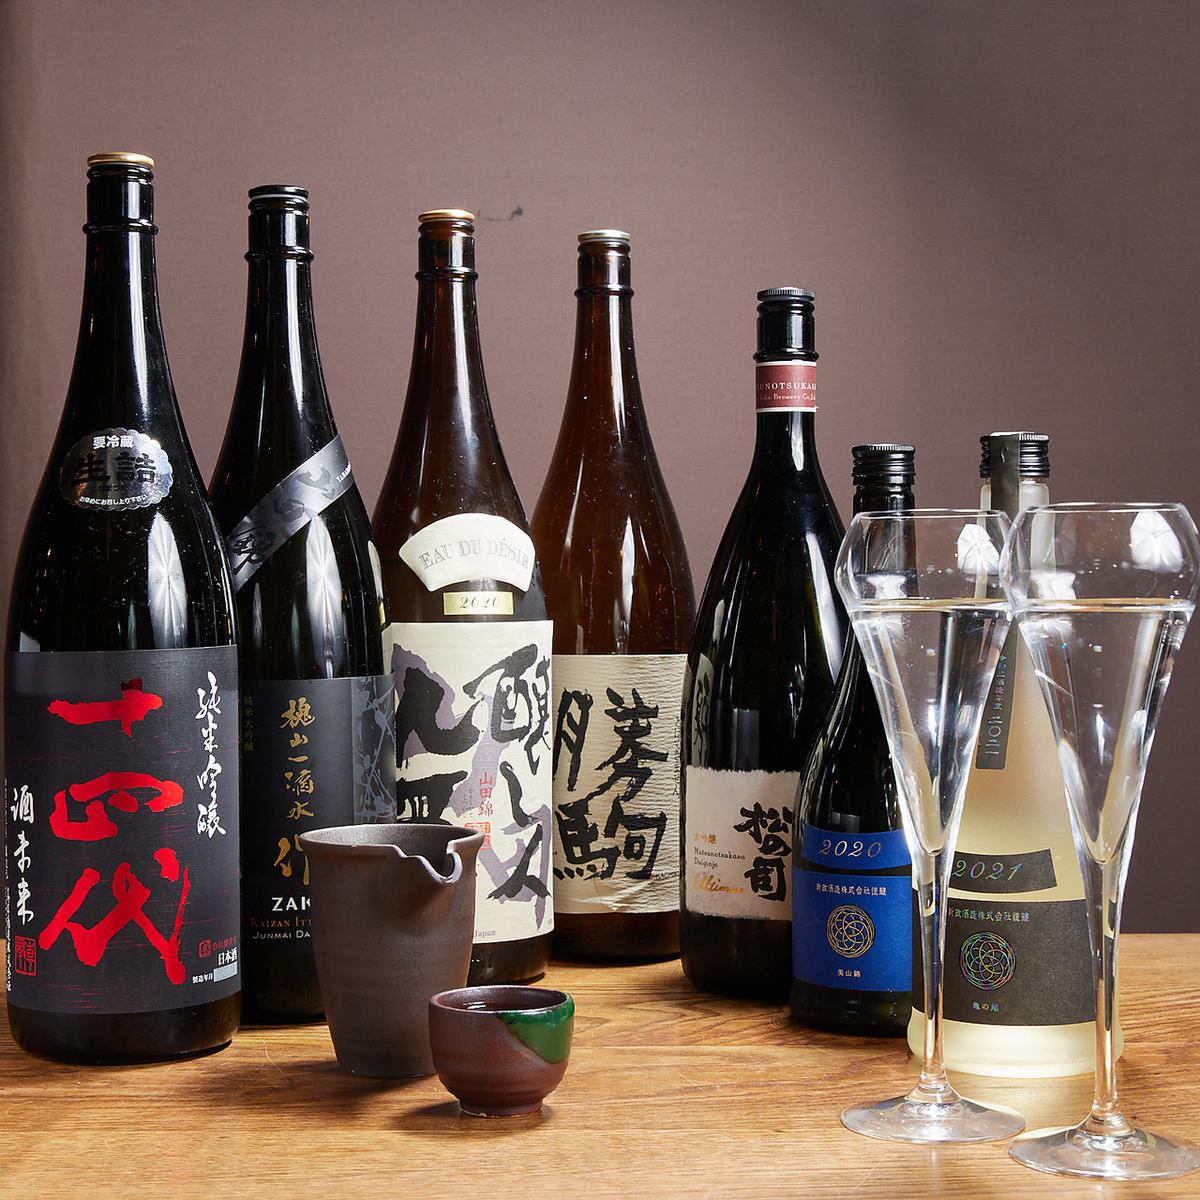 Weekdays only! Charcoal-grilled course with all-you-can-drink carefully selected sake for 3,300 JPY (incl. tax)